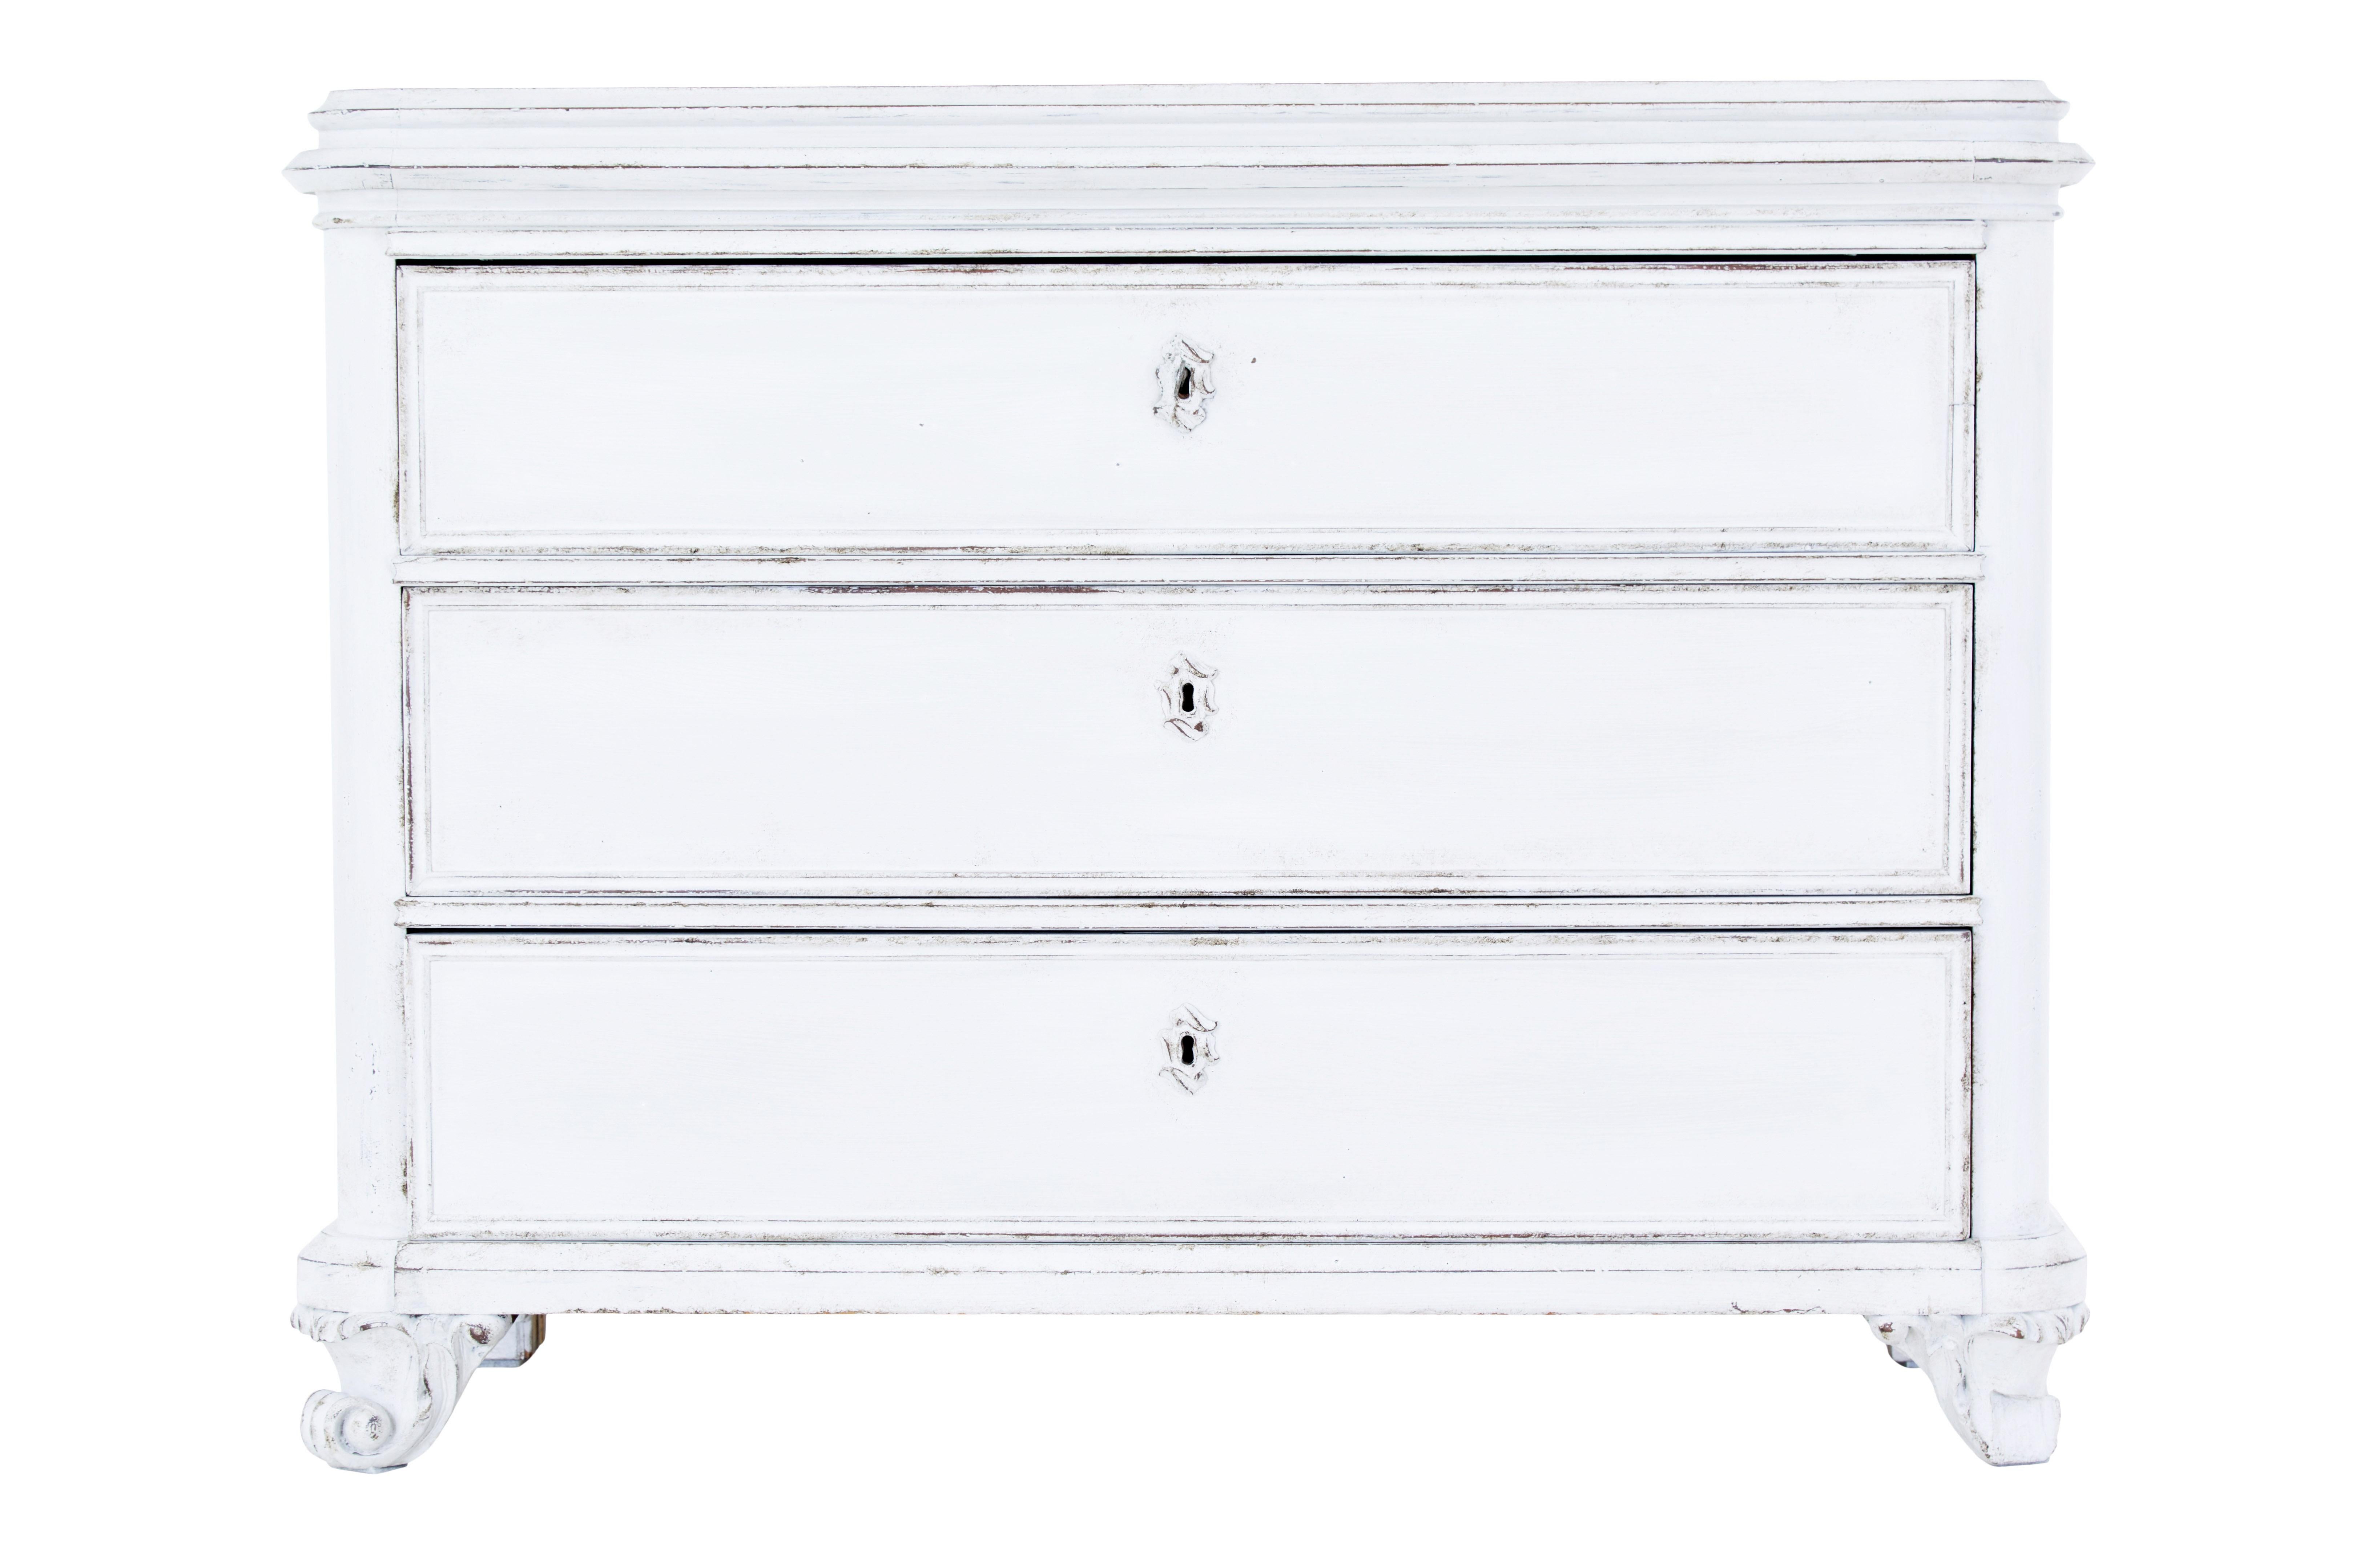 19th century painted chest of drawers circa 1870.

Substantial baroque revival Swedish chest of drawers.  Presented in later paint which is best described as a very light grey or a dirty white.

Plain top with moulded edge, below which are 3 drawers